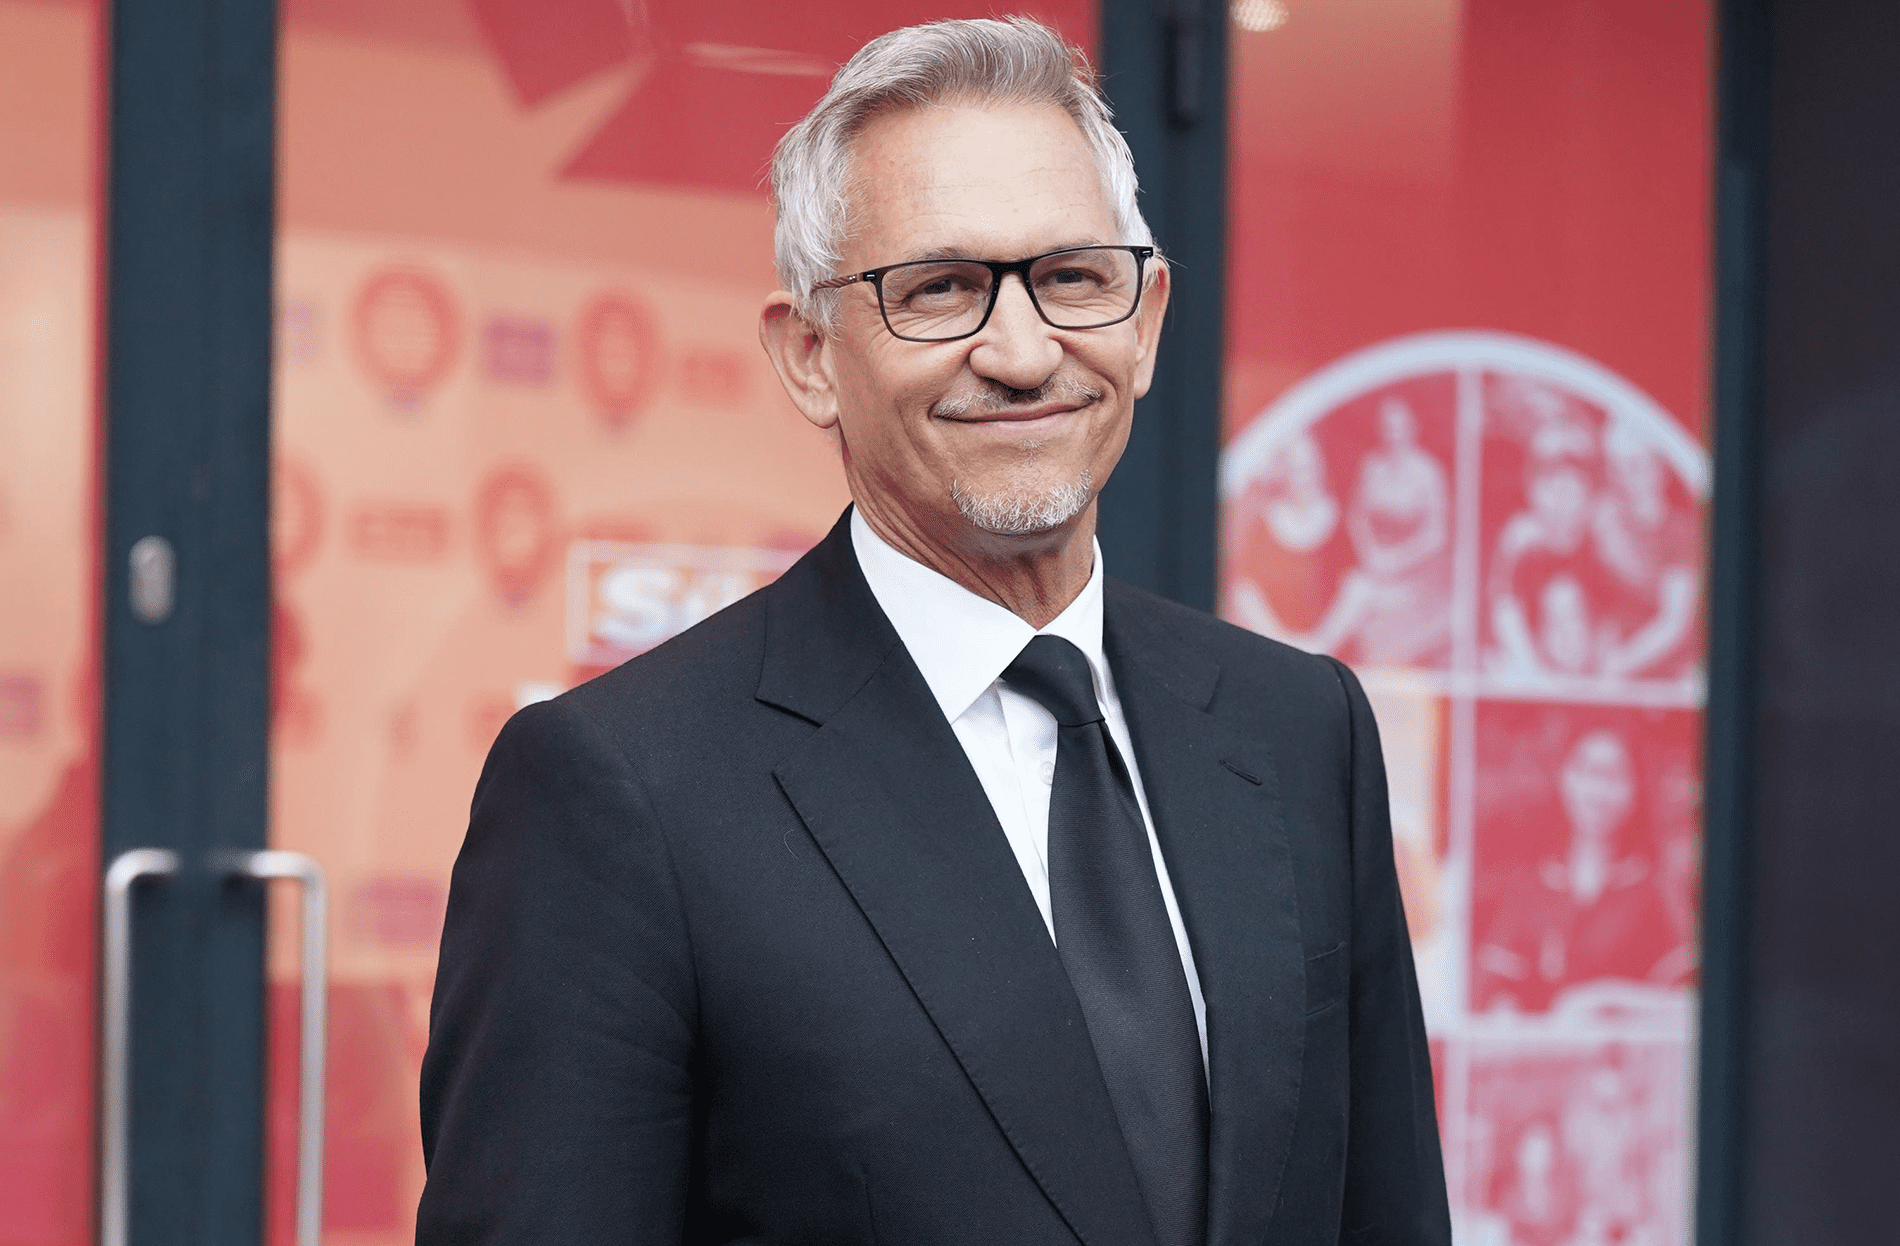 Gary Lineker ‘refusing’ to delete Nazi Germany tweet and not answering calls from BBC bosses – reports